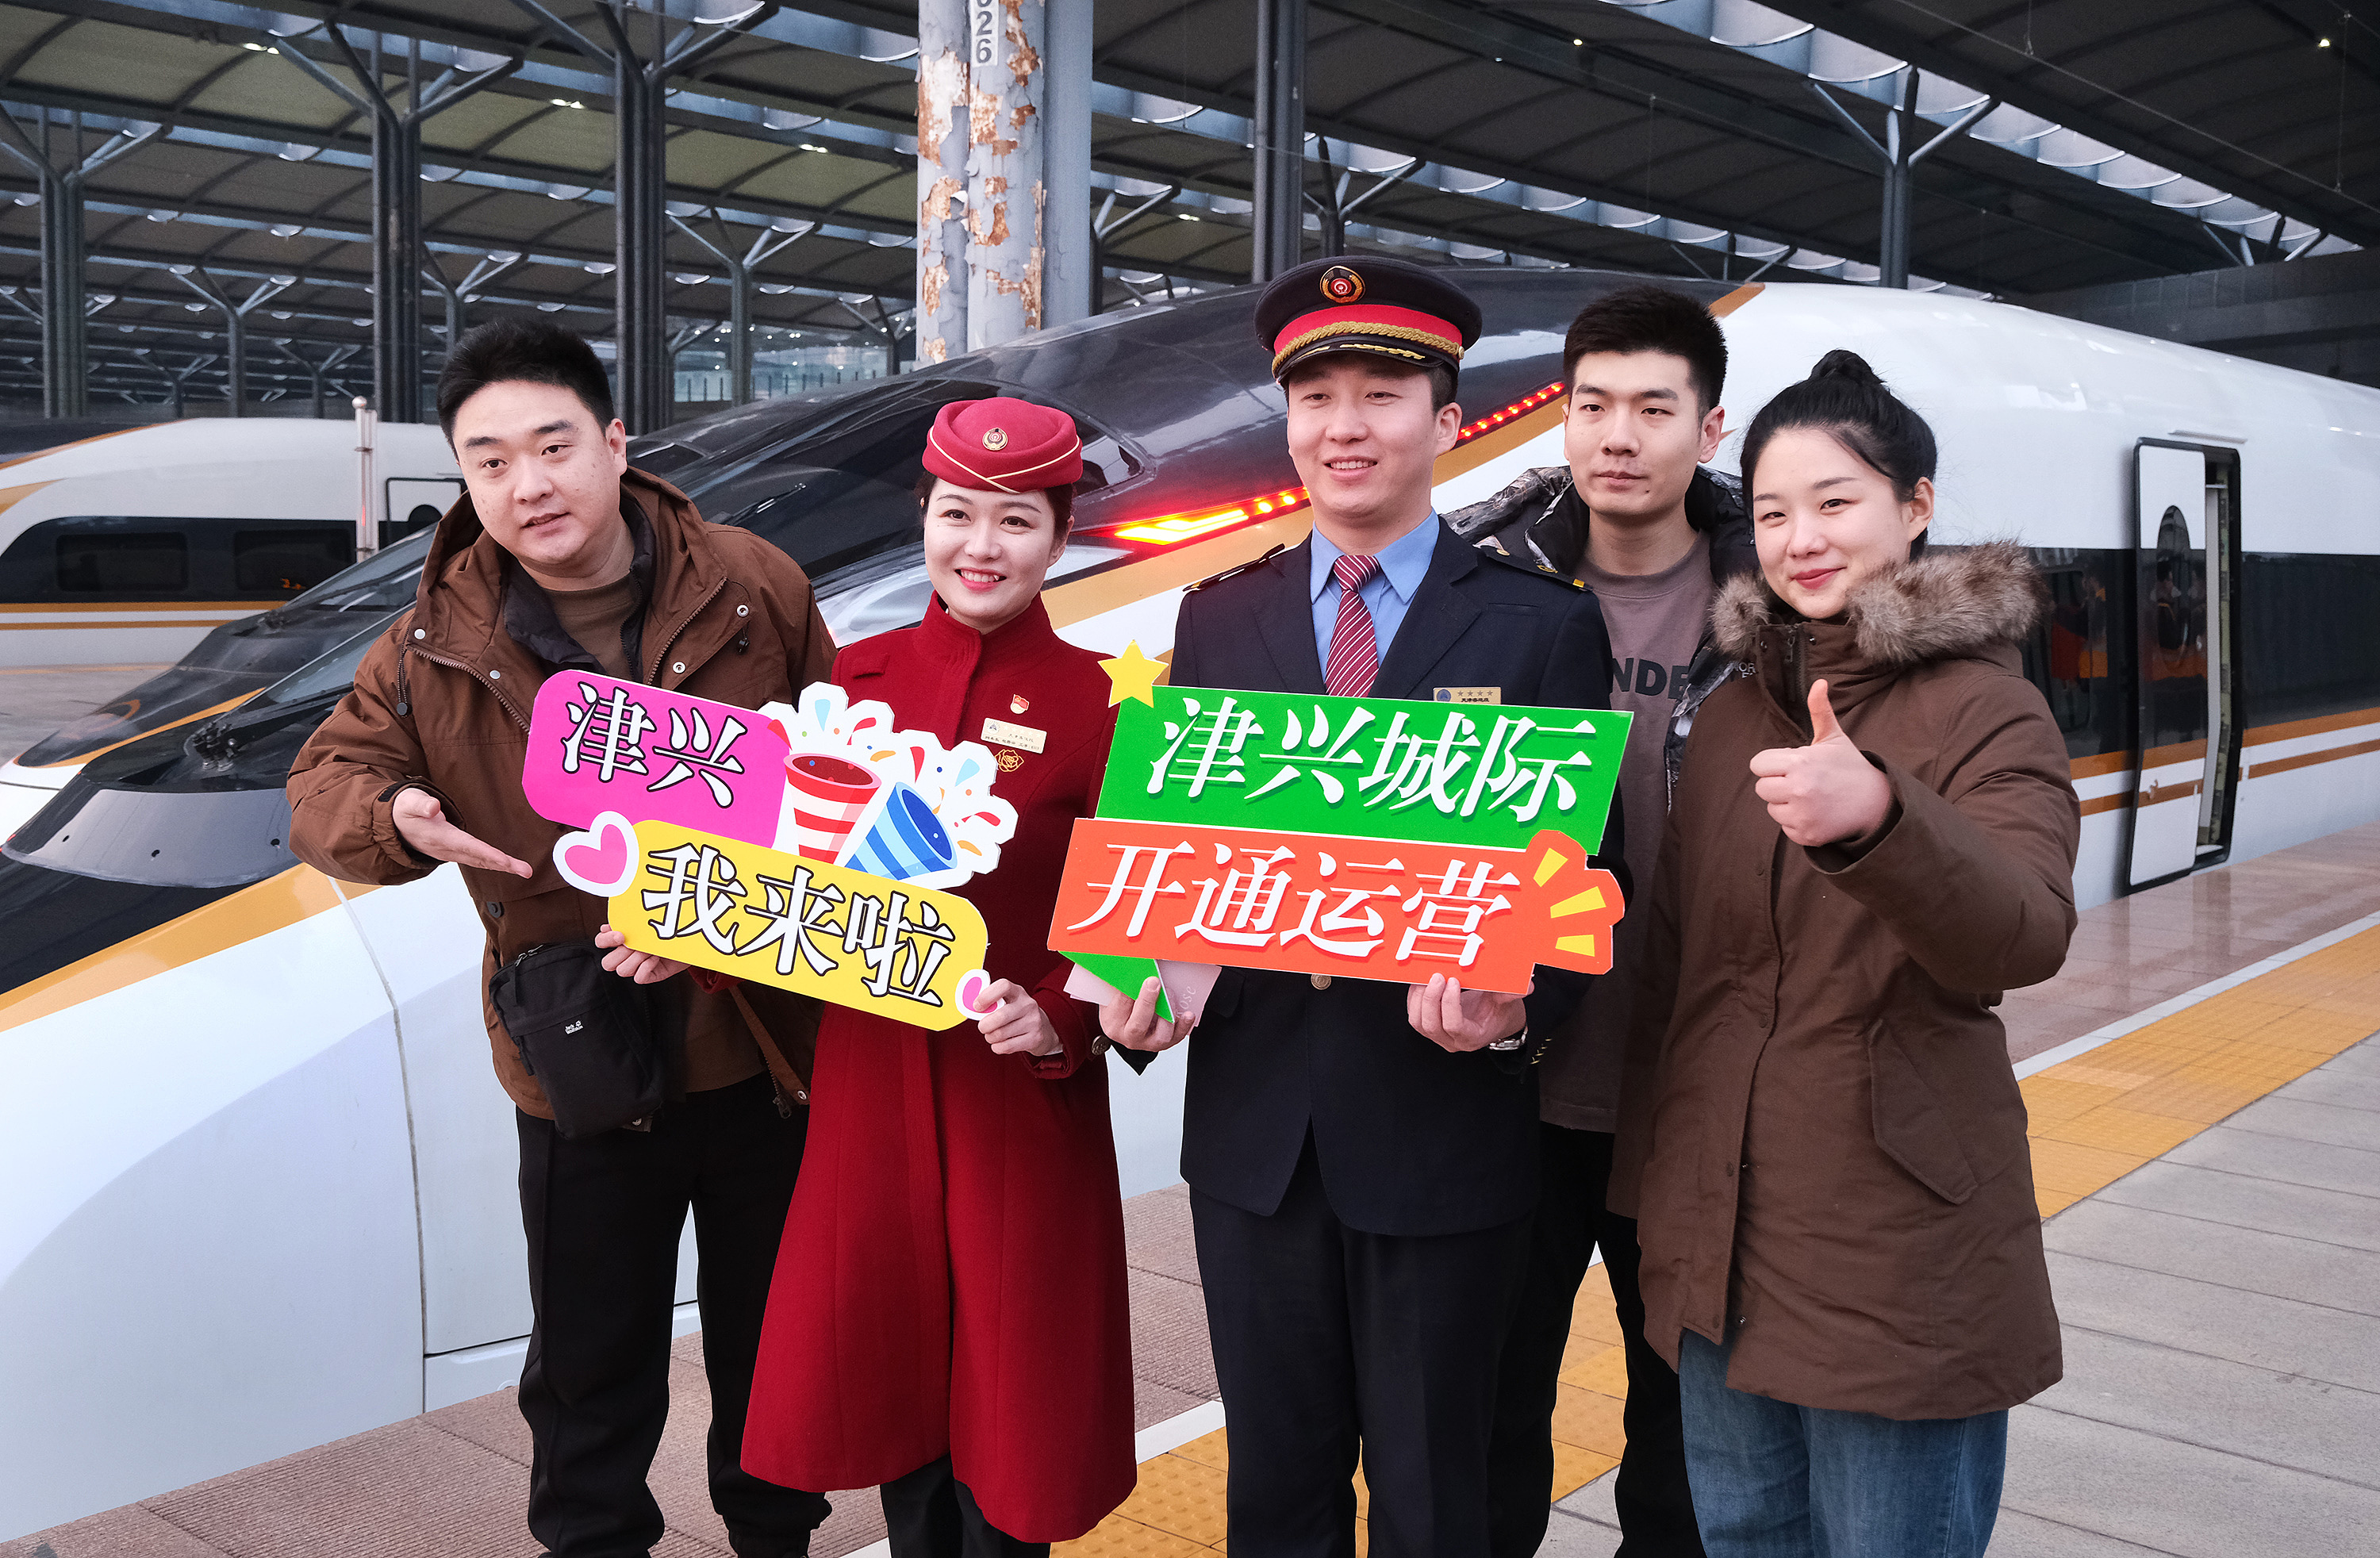 Passengers and crew members pose for a group photo outside a train at the Tianjin West Railway Station in Tianjin, north China, marking the opening of a new line connecting Tianjin with the Beijing Daxing International Airport, December 18, 2023. /CFP